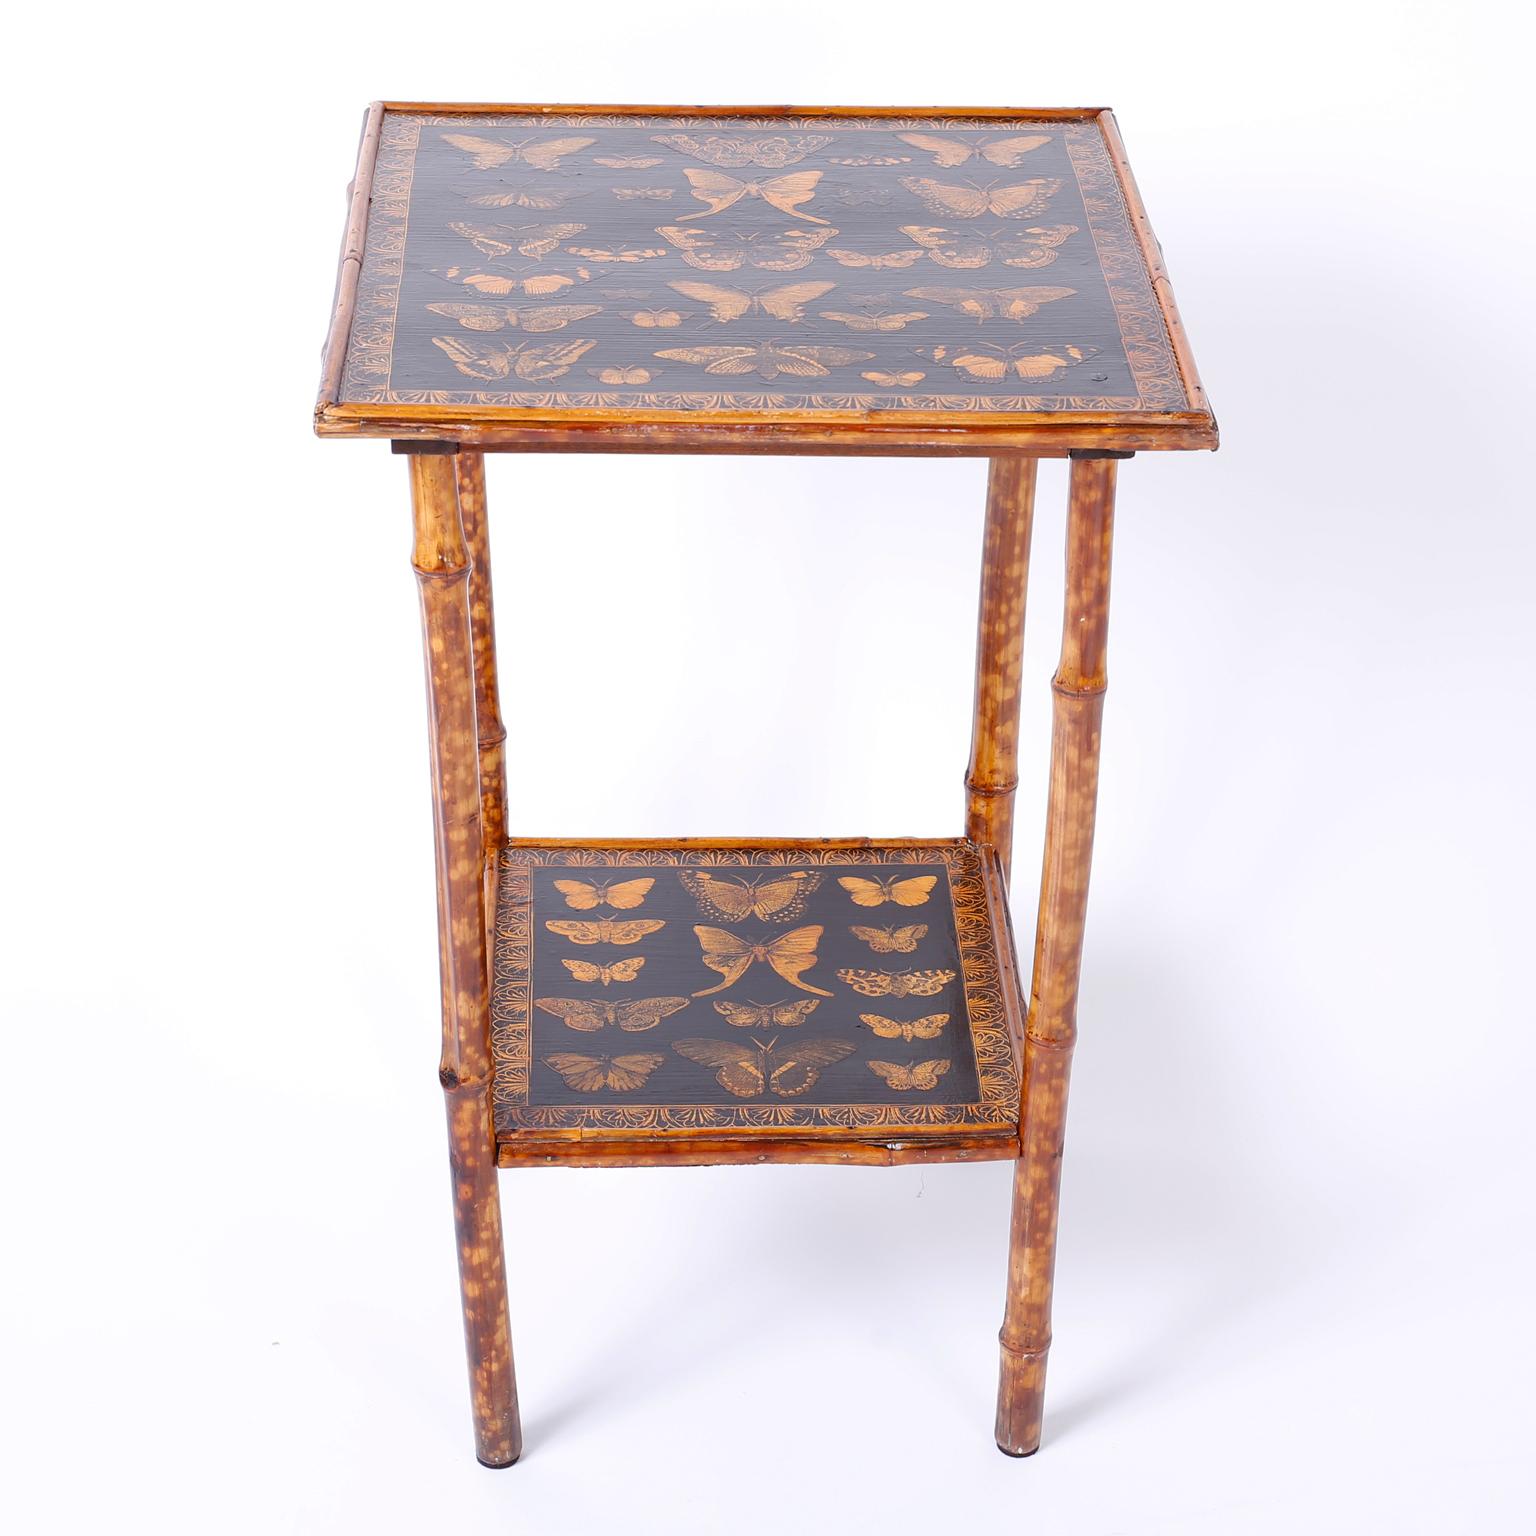 Antique English square bamboo occasional table ingeniously decorated with contemporary decoupage butterflies on both tiers.